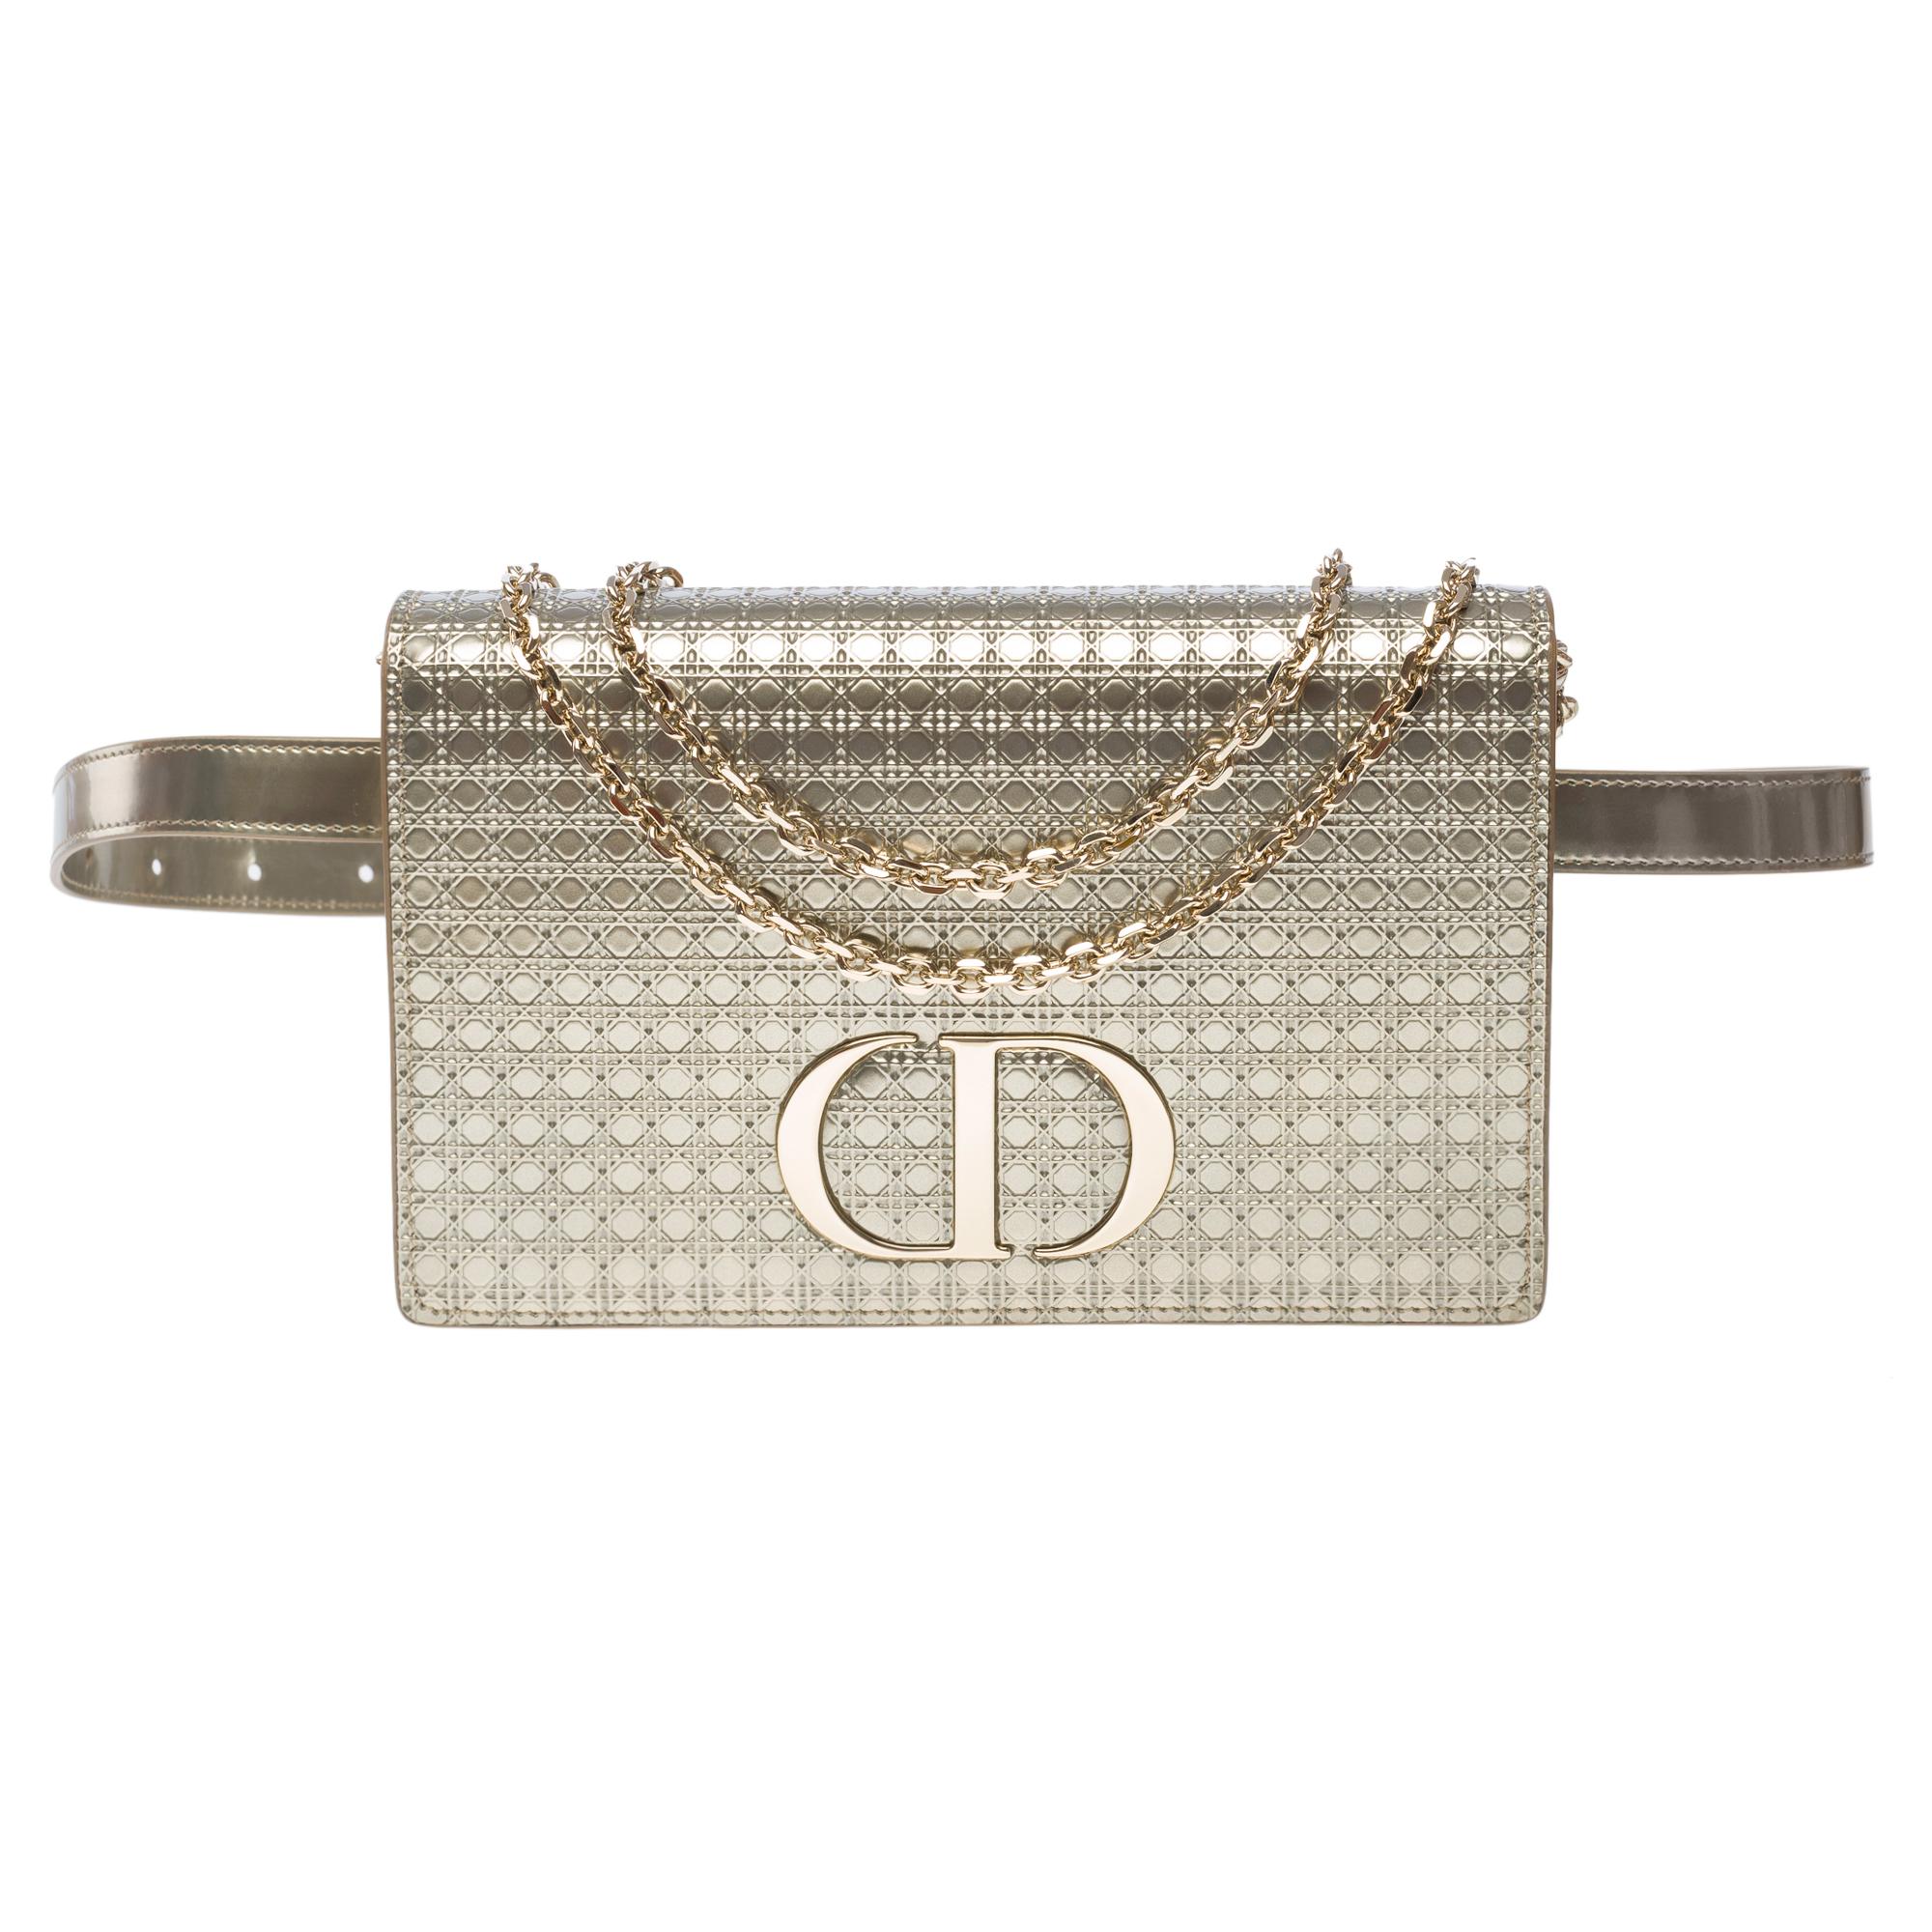 Women's Christian Dior shoulder&belt bag 2 in 1 30 Montaigne in silver leather